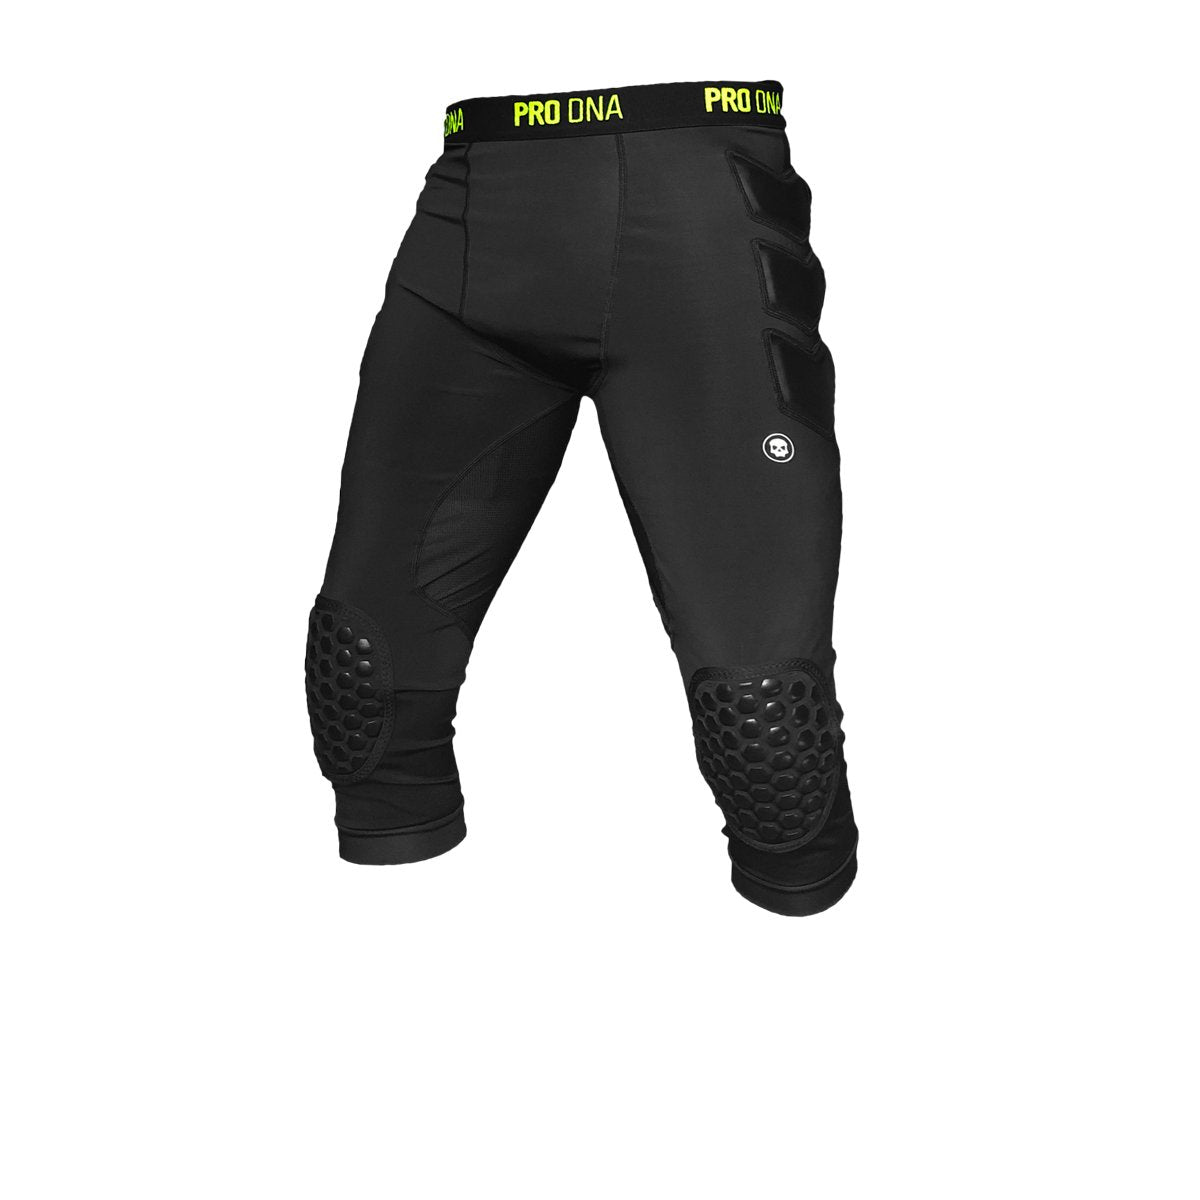 Infamous Pro DNA Slide Shorts - Eminent Paintball And Airsoft